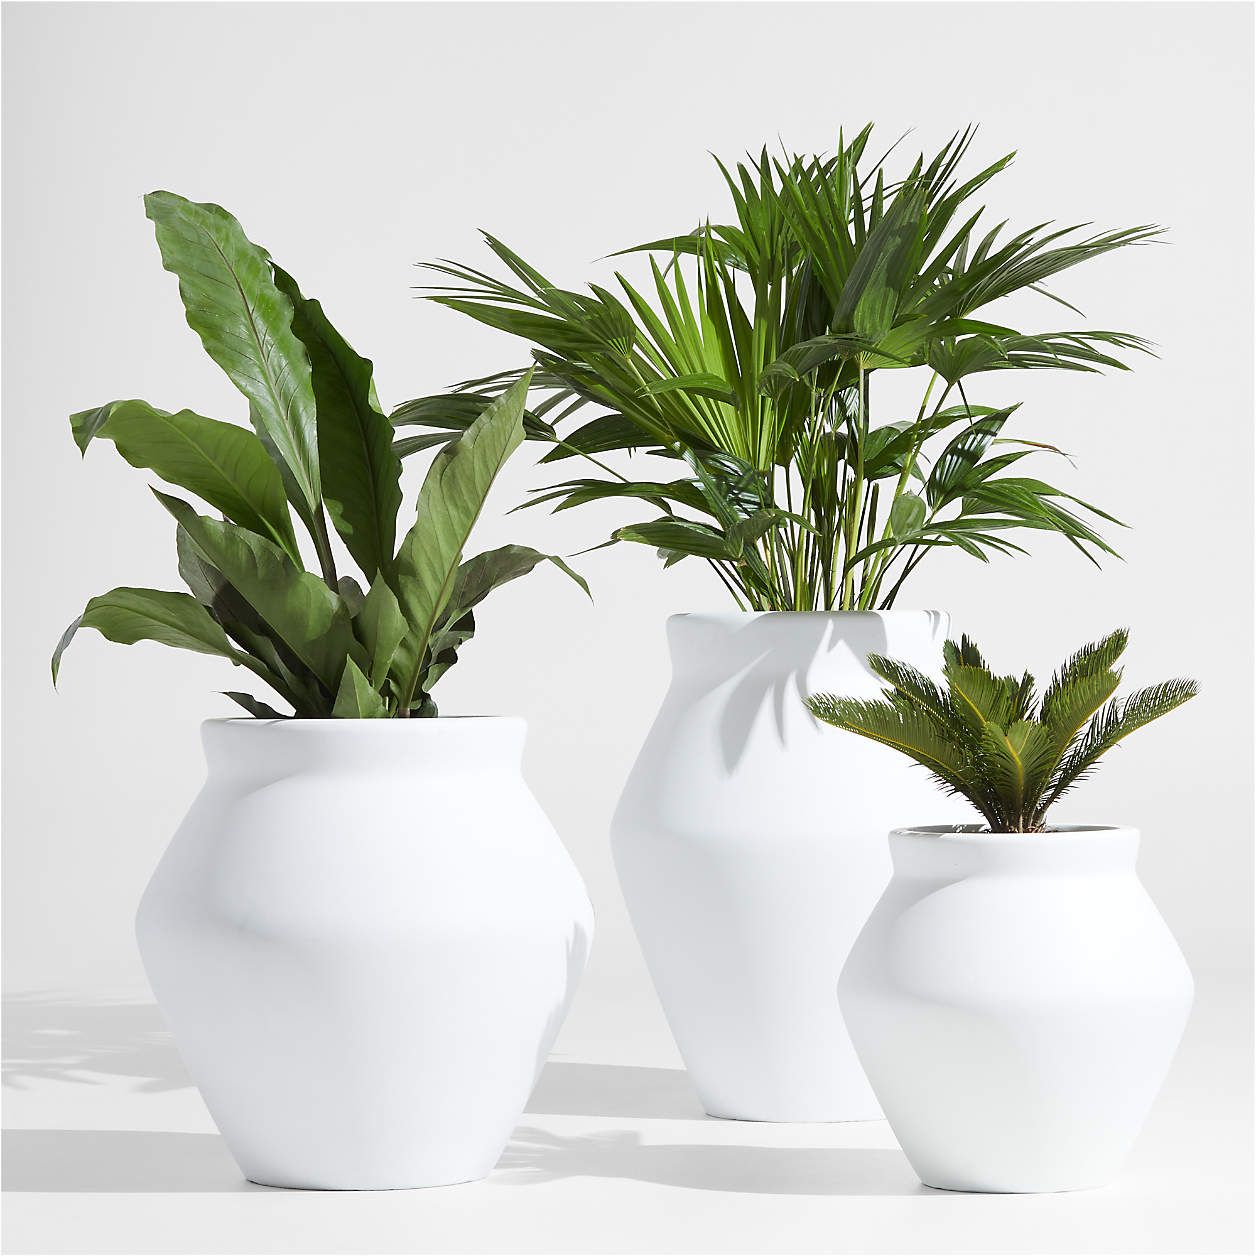 Wabi Small White Fiberstone Planter Pot by Leanne Ford + Reviews | Crate & Barrel | Crate & Barrel